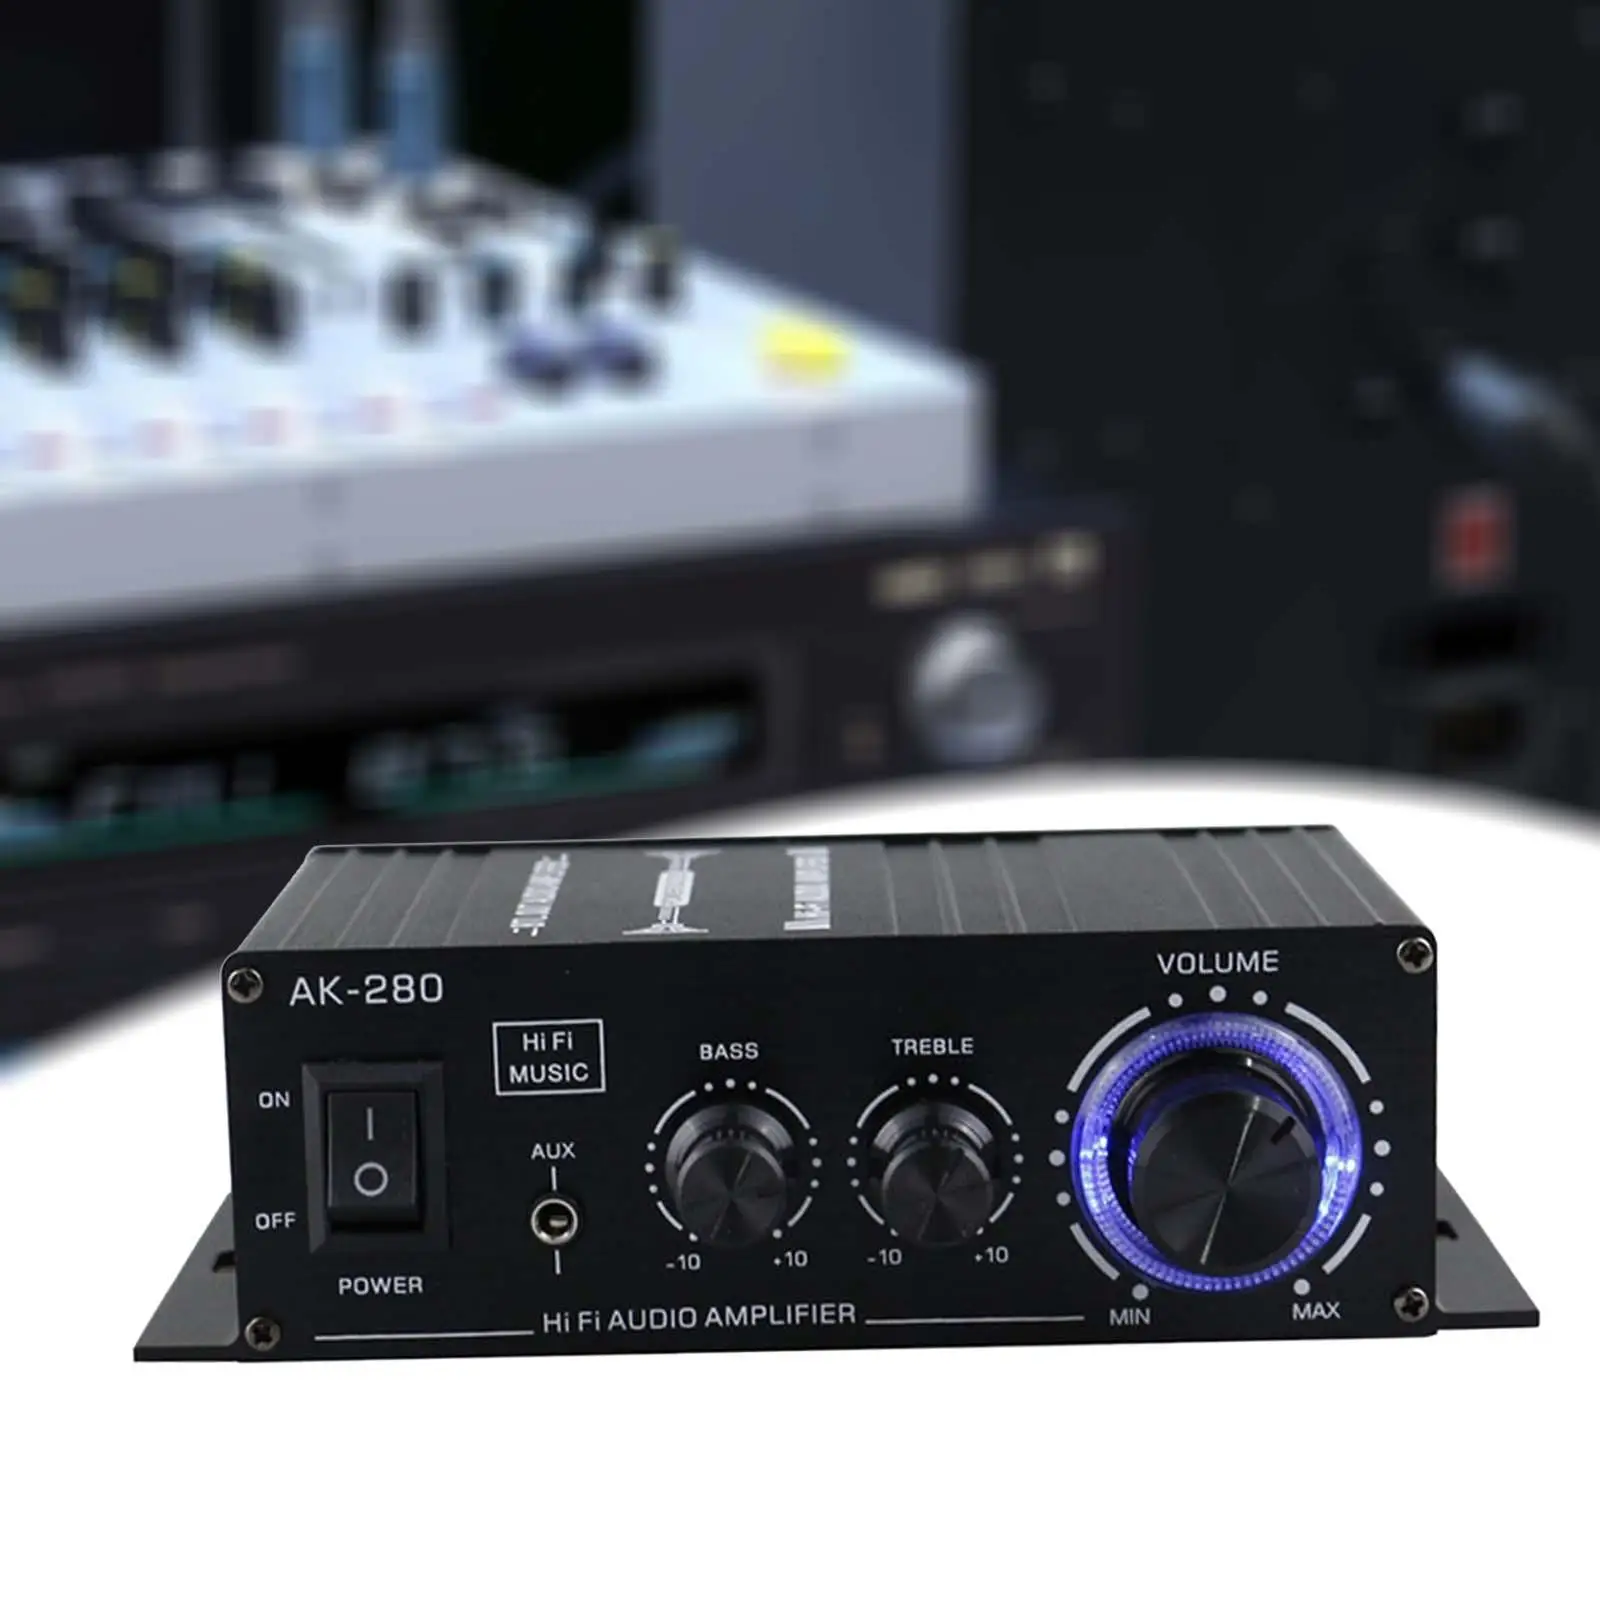 AK-280 Mini Digital Audio Power Amplifier 2 Channel 40wx2 Subwoofer Amplifier 12V Stereo Amplifiers for Home Theater Studio Use